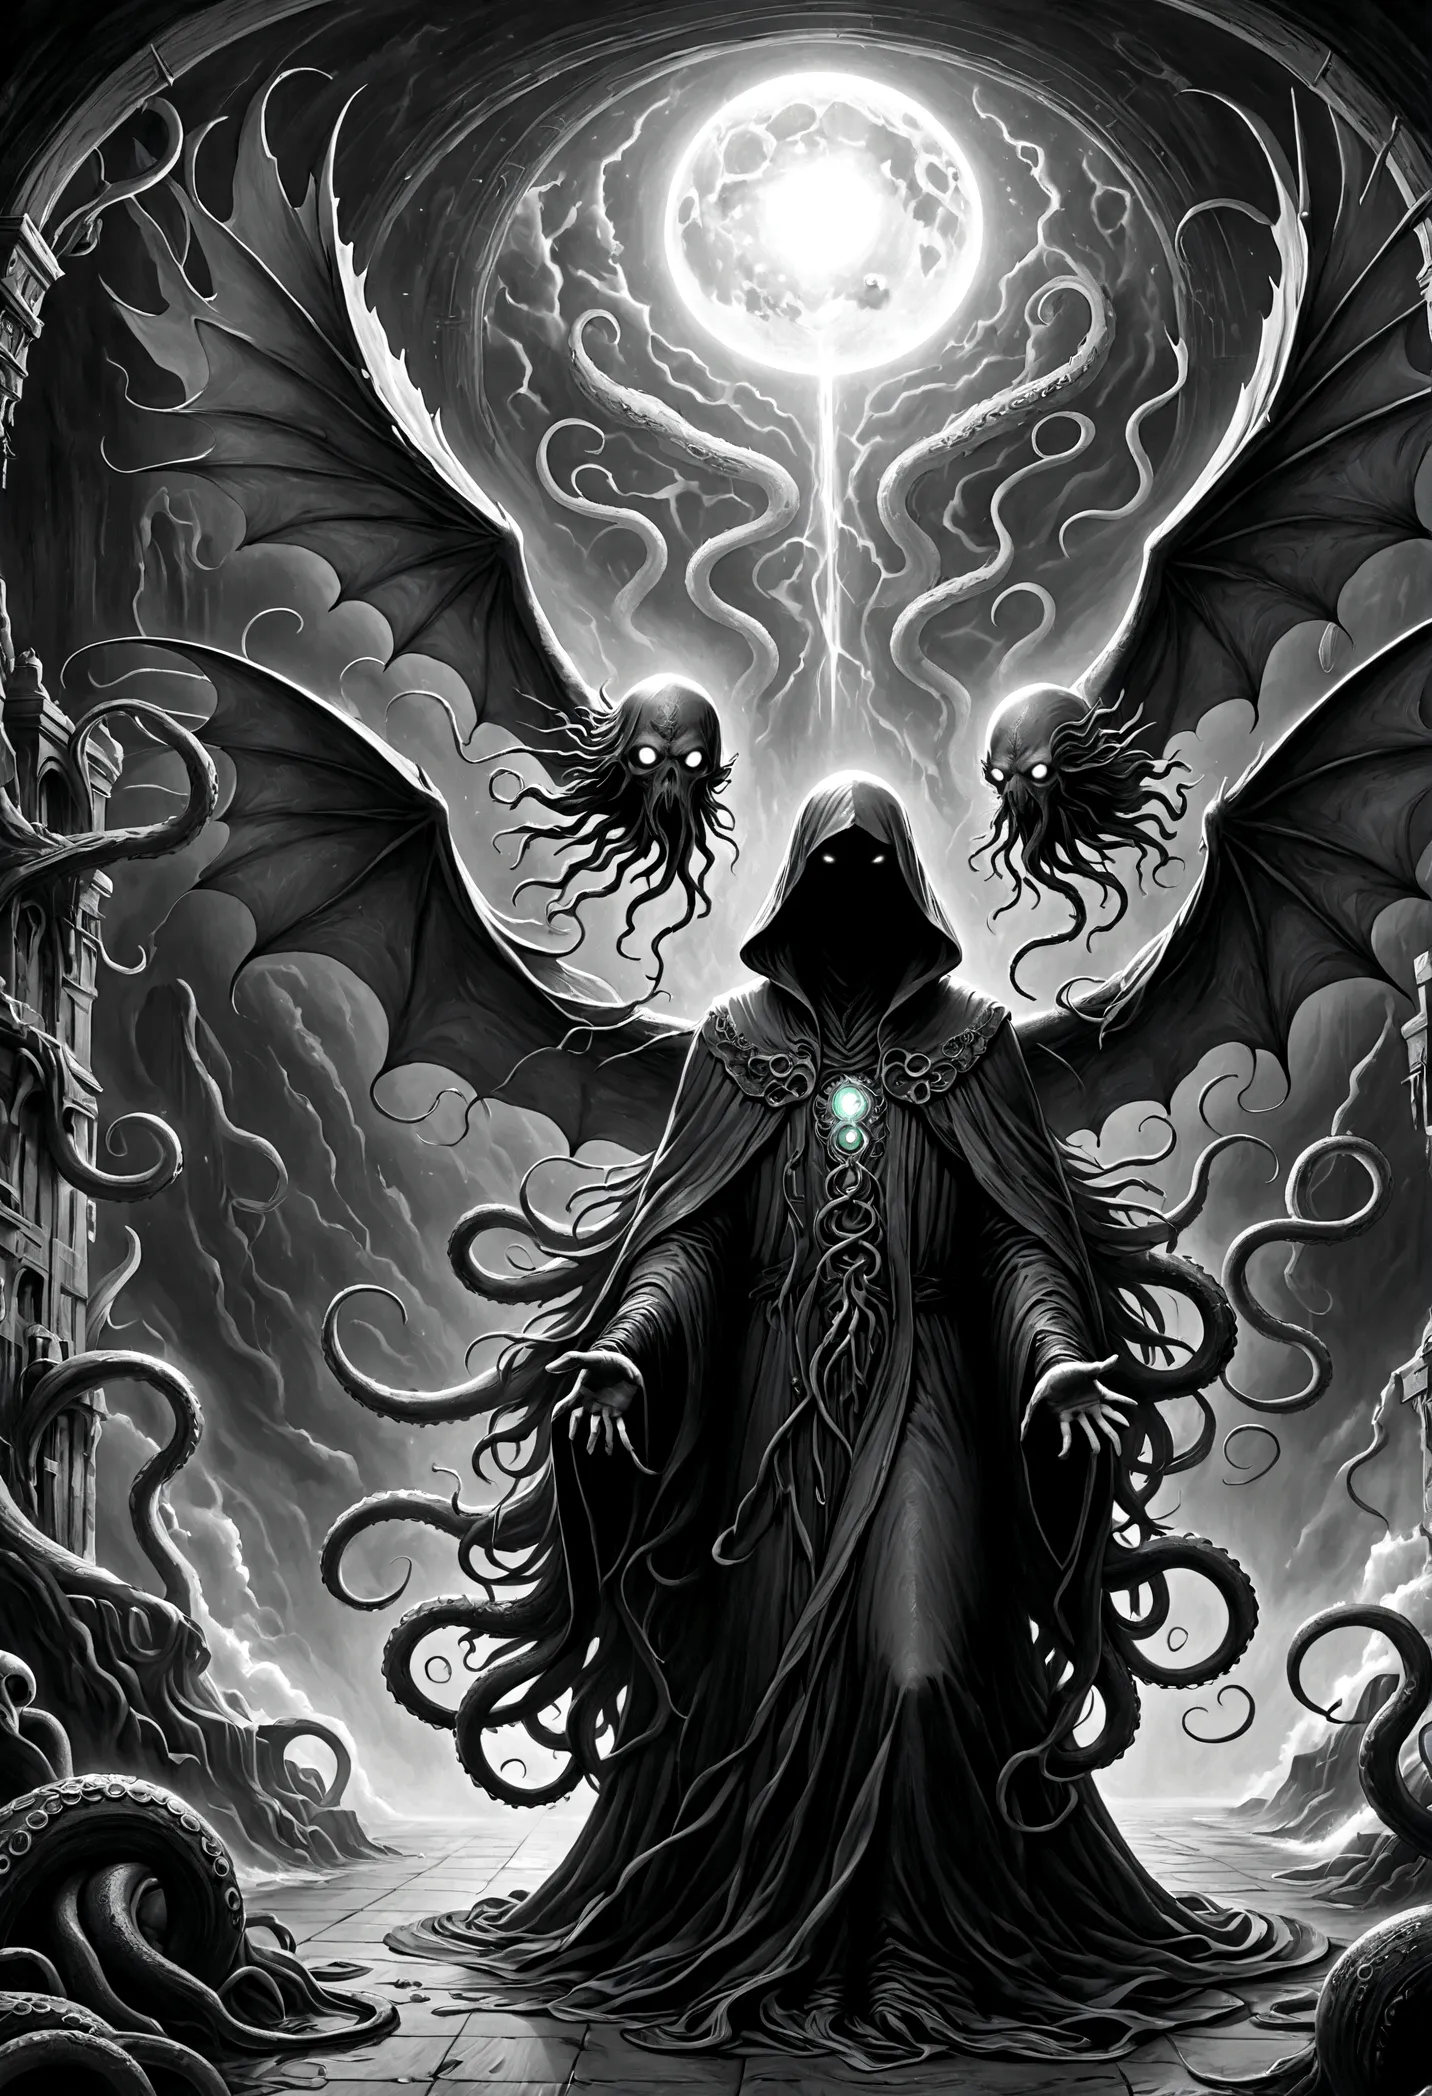 a terrifying ancient eldritch entity, cthulhu mythos, cosmic horror, long tentacles, wings, divine and demonic form, cloak, cont...